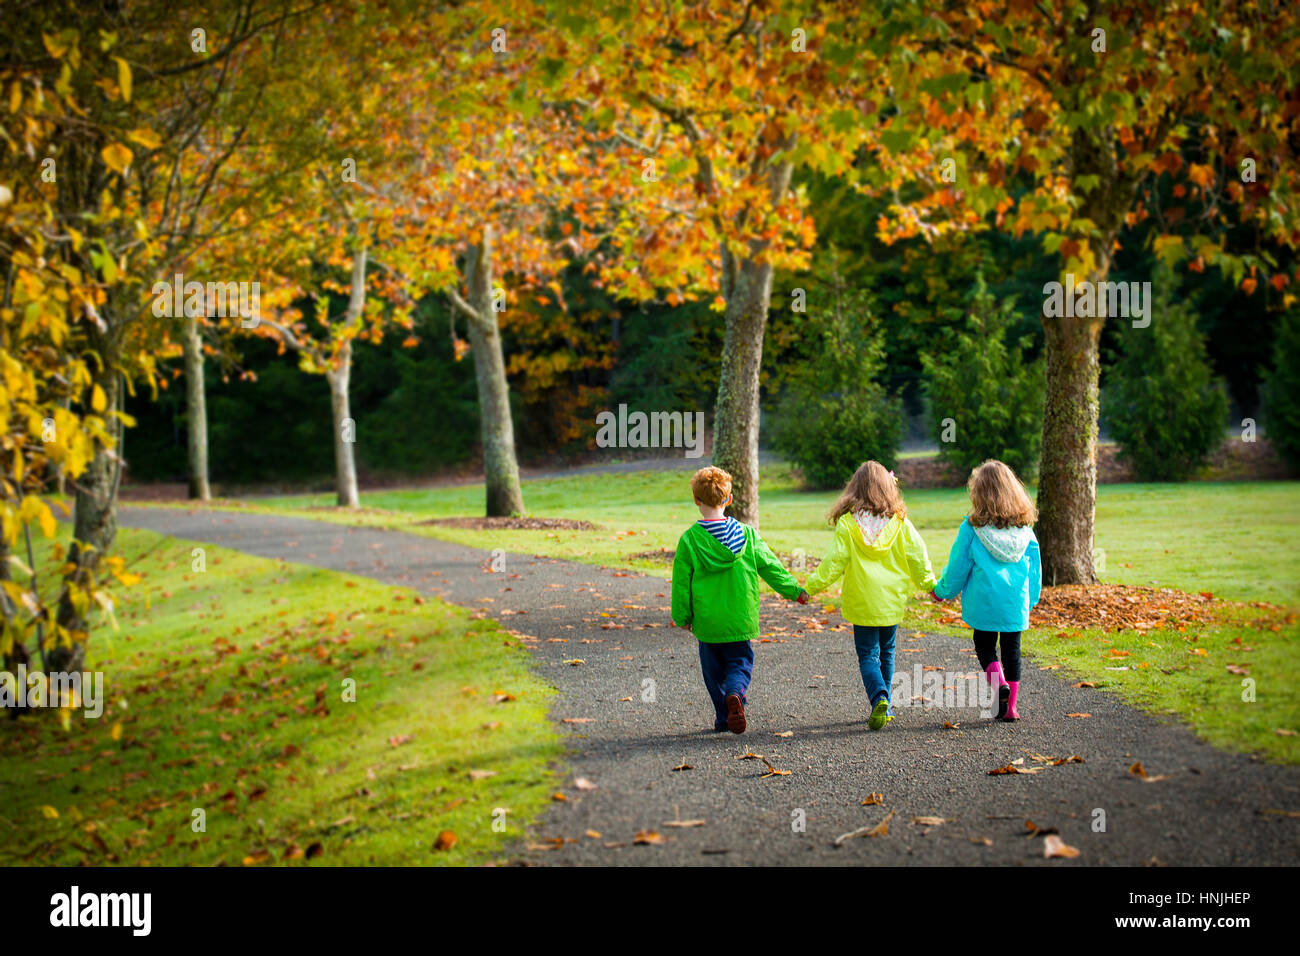 triplets children walking on pathway in fall setting Stock Photo